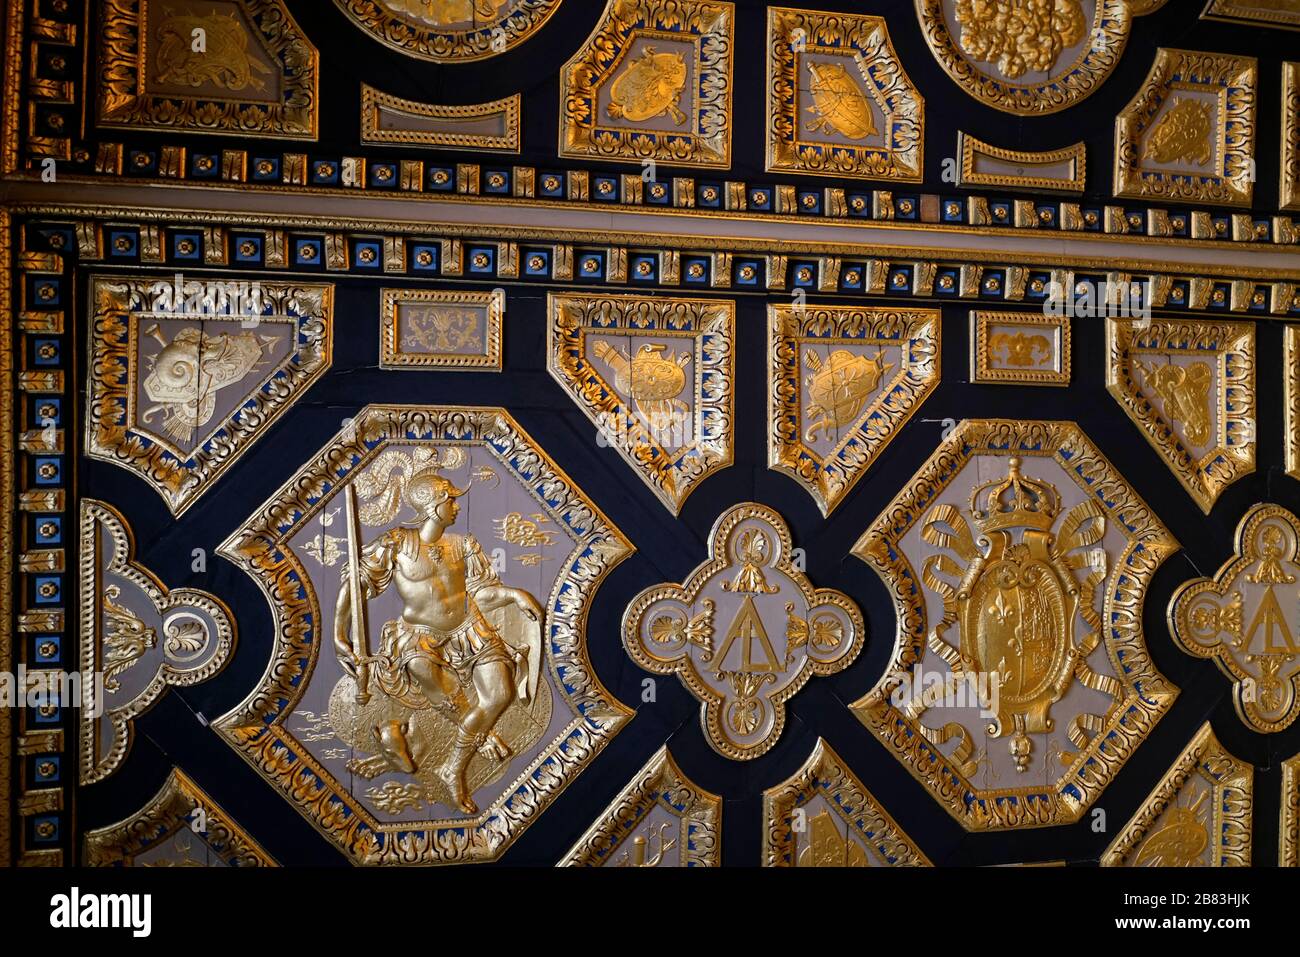 Exquisite wood carved ceiling of Reception room of Pope's Apartments.Chateau de Fontainebleau Palace.Seine-et-Marne.France Stock Photo